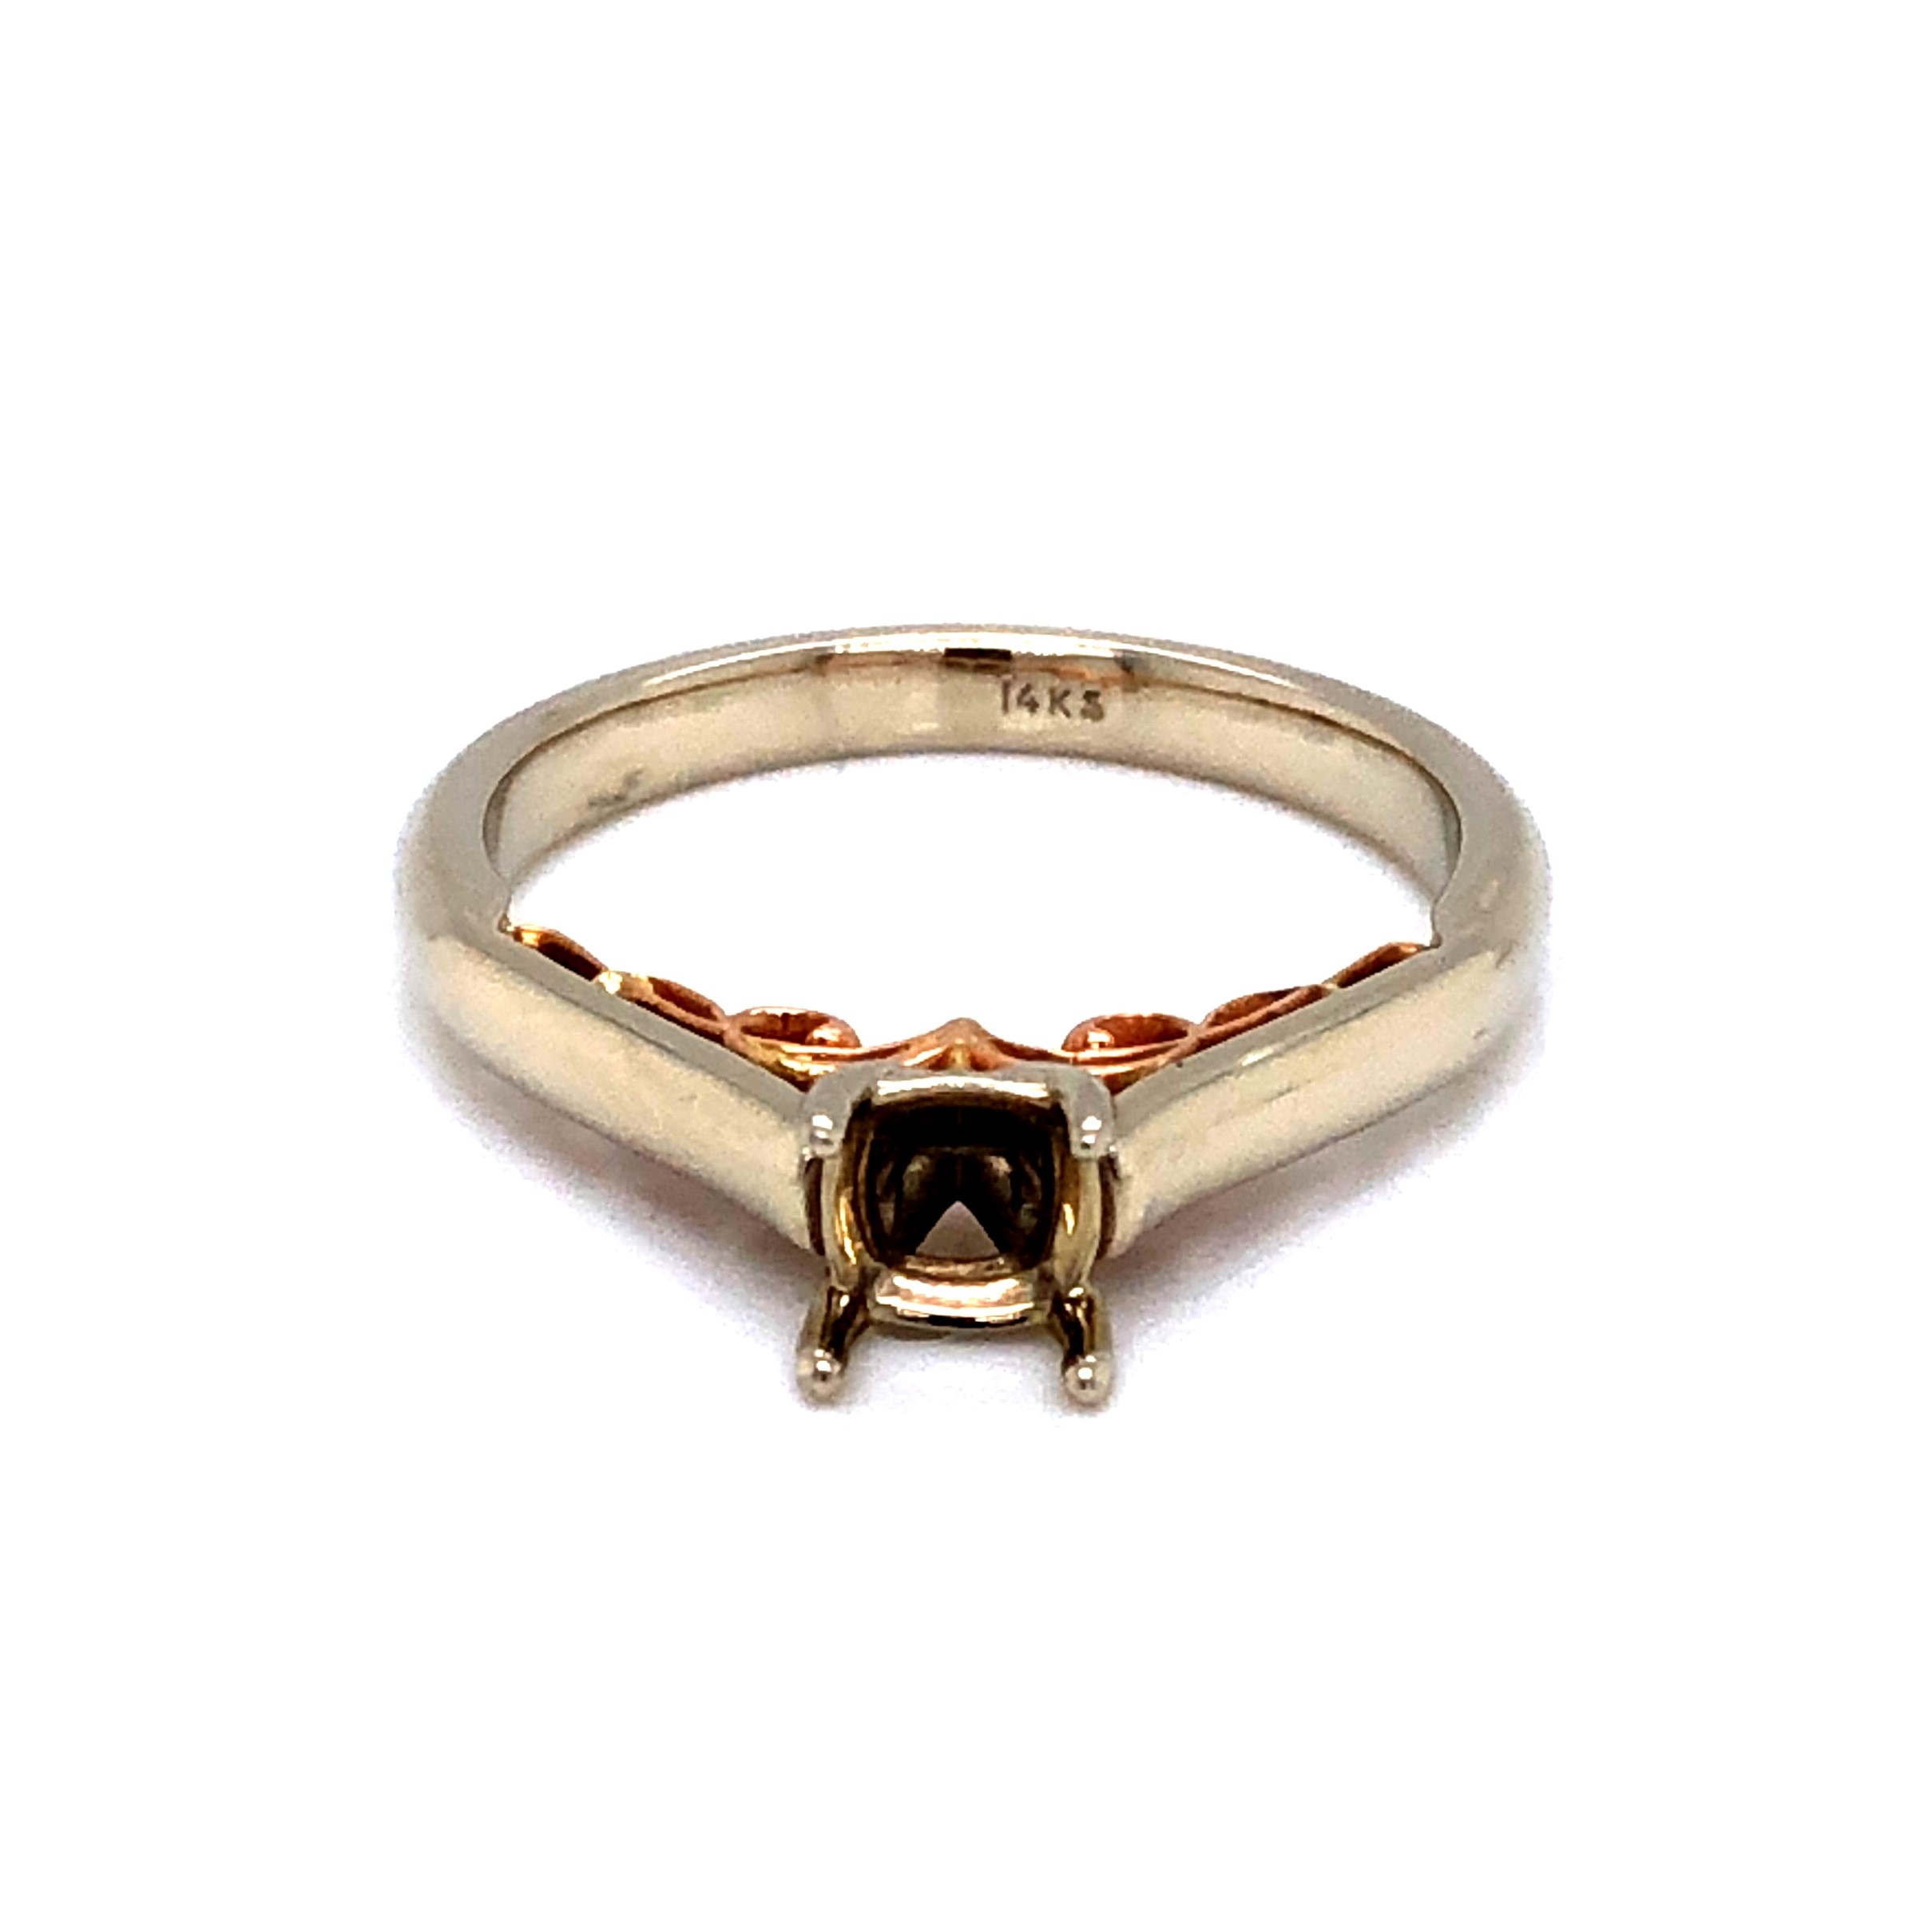 14 Karat white gold Solitaire Remount with rose gold detail.  dwt: 2.4